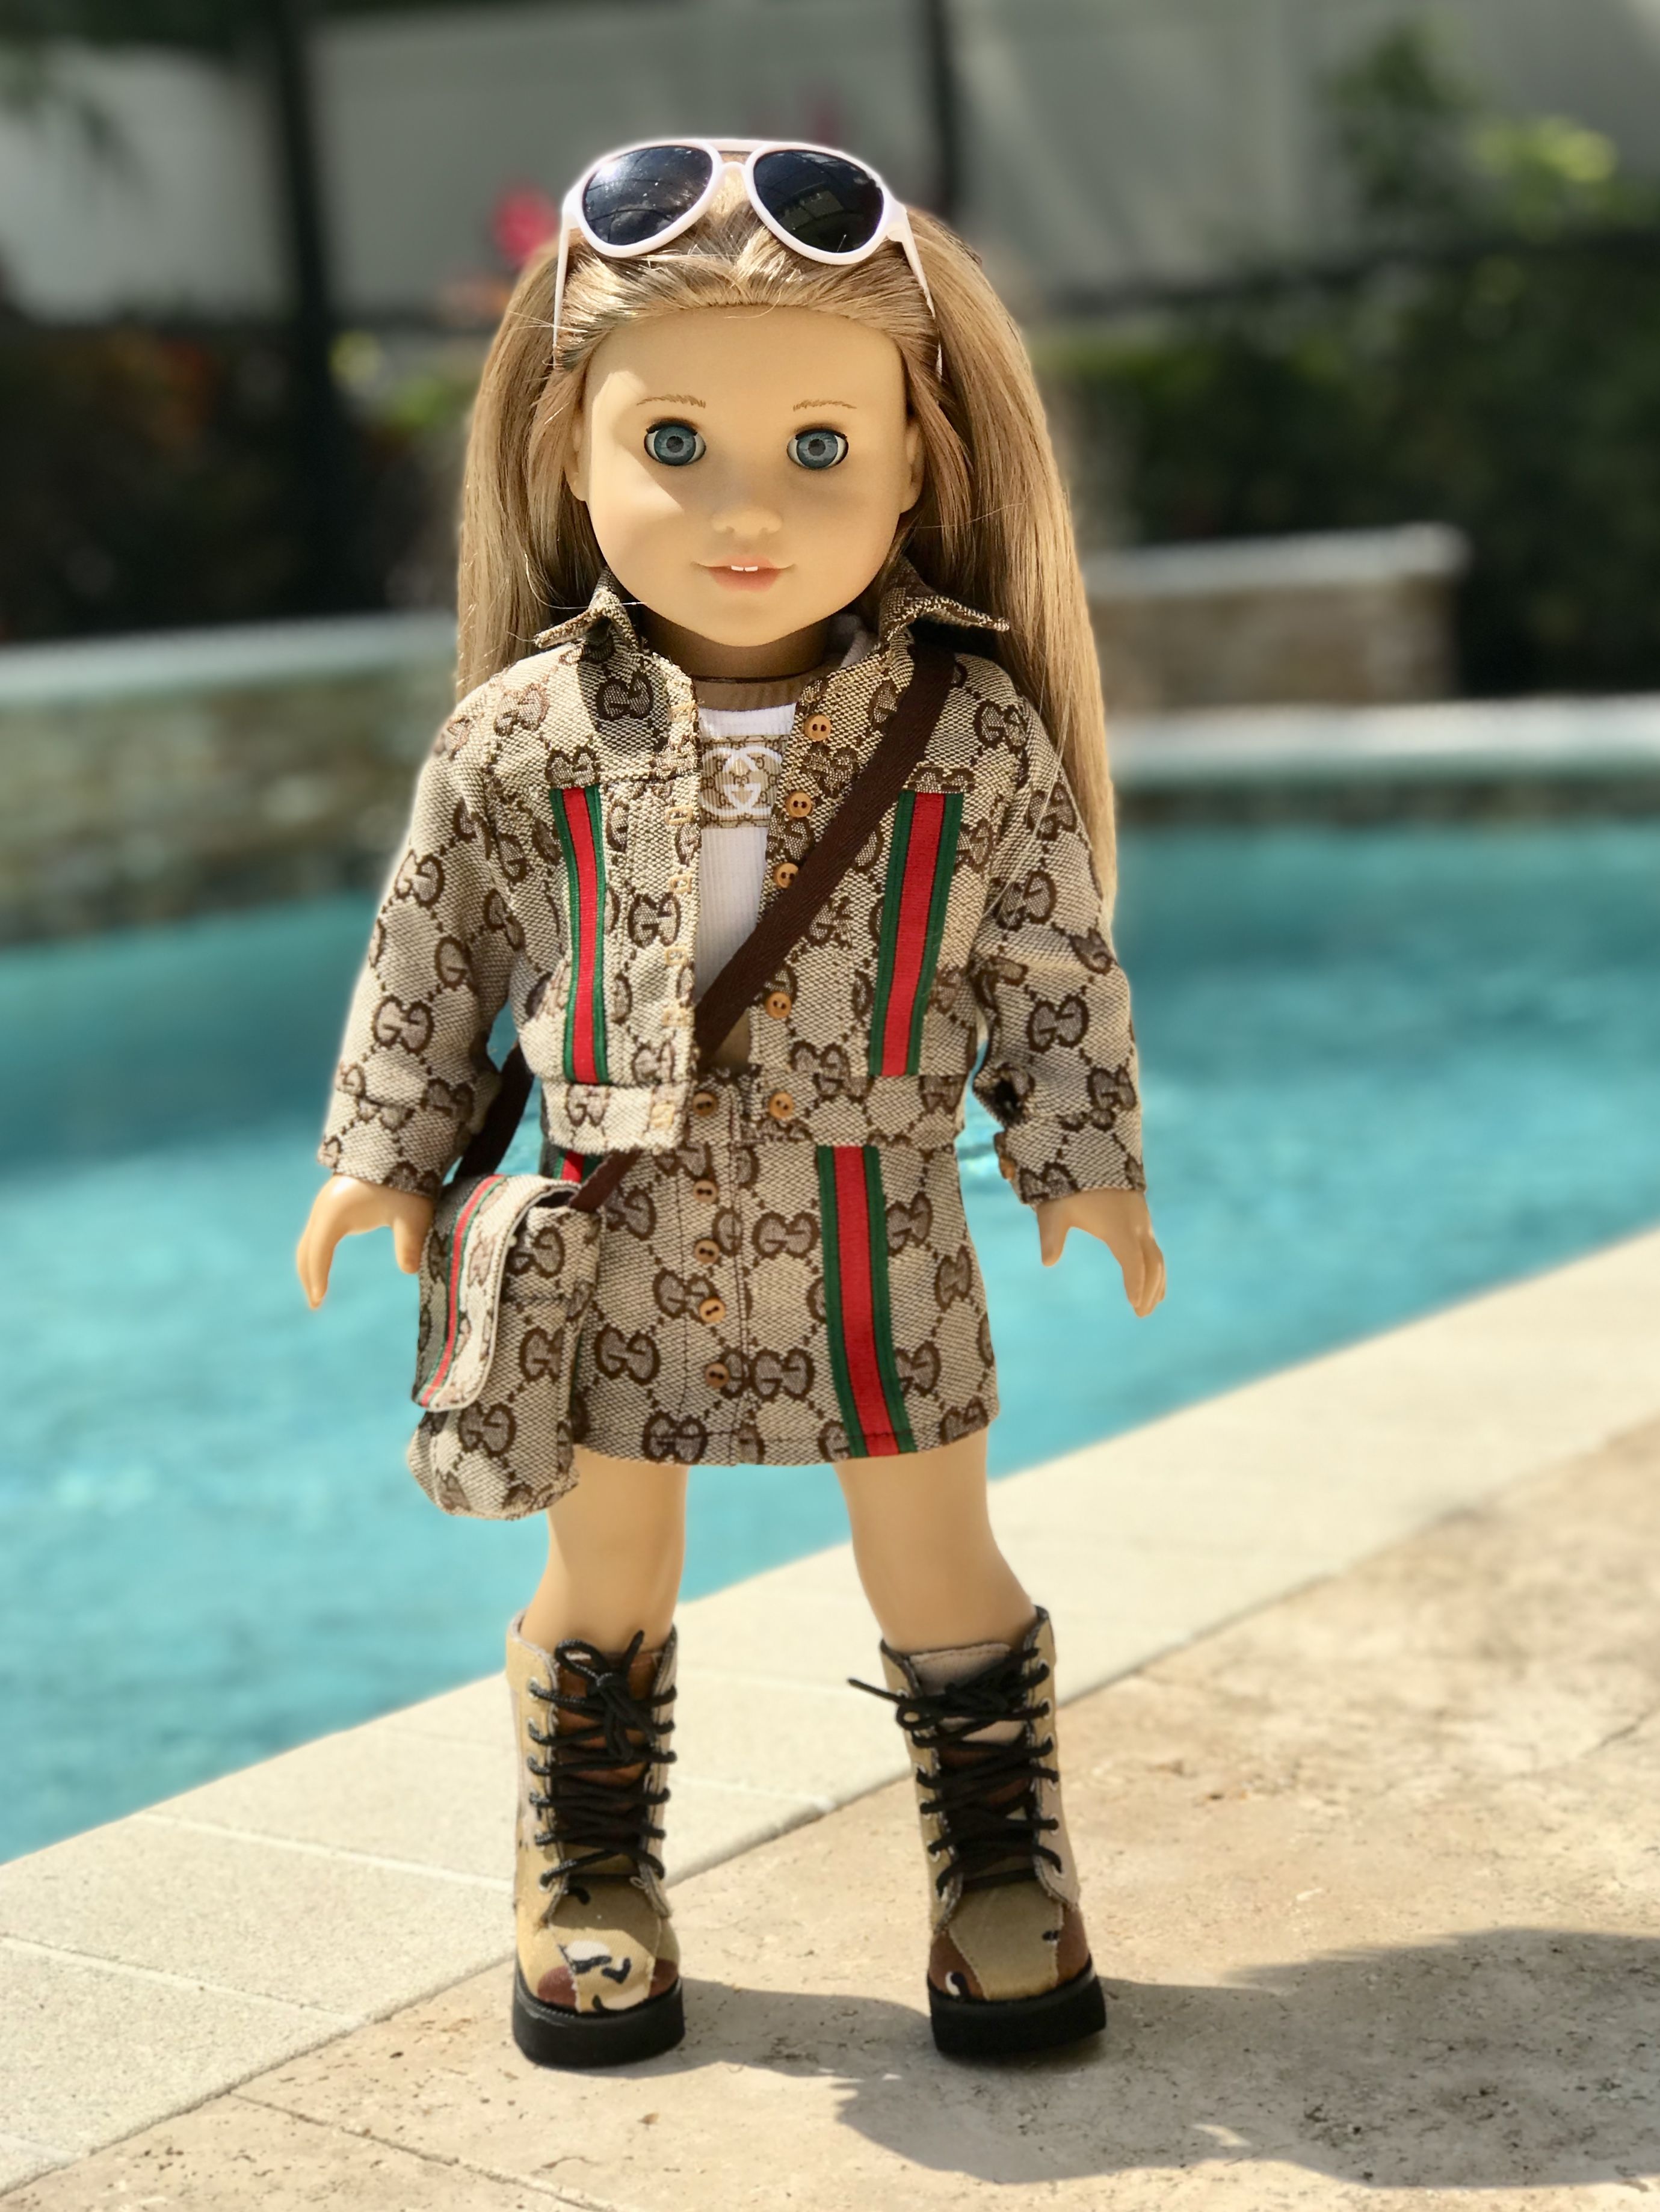 AG Doll Gucci Inspired Moments. American girl doll, American girl, American girl patterns